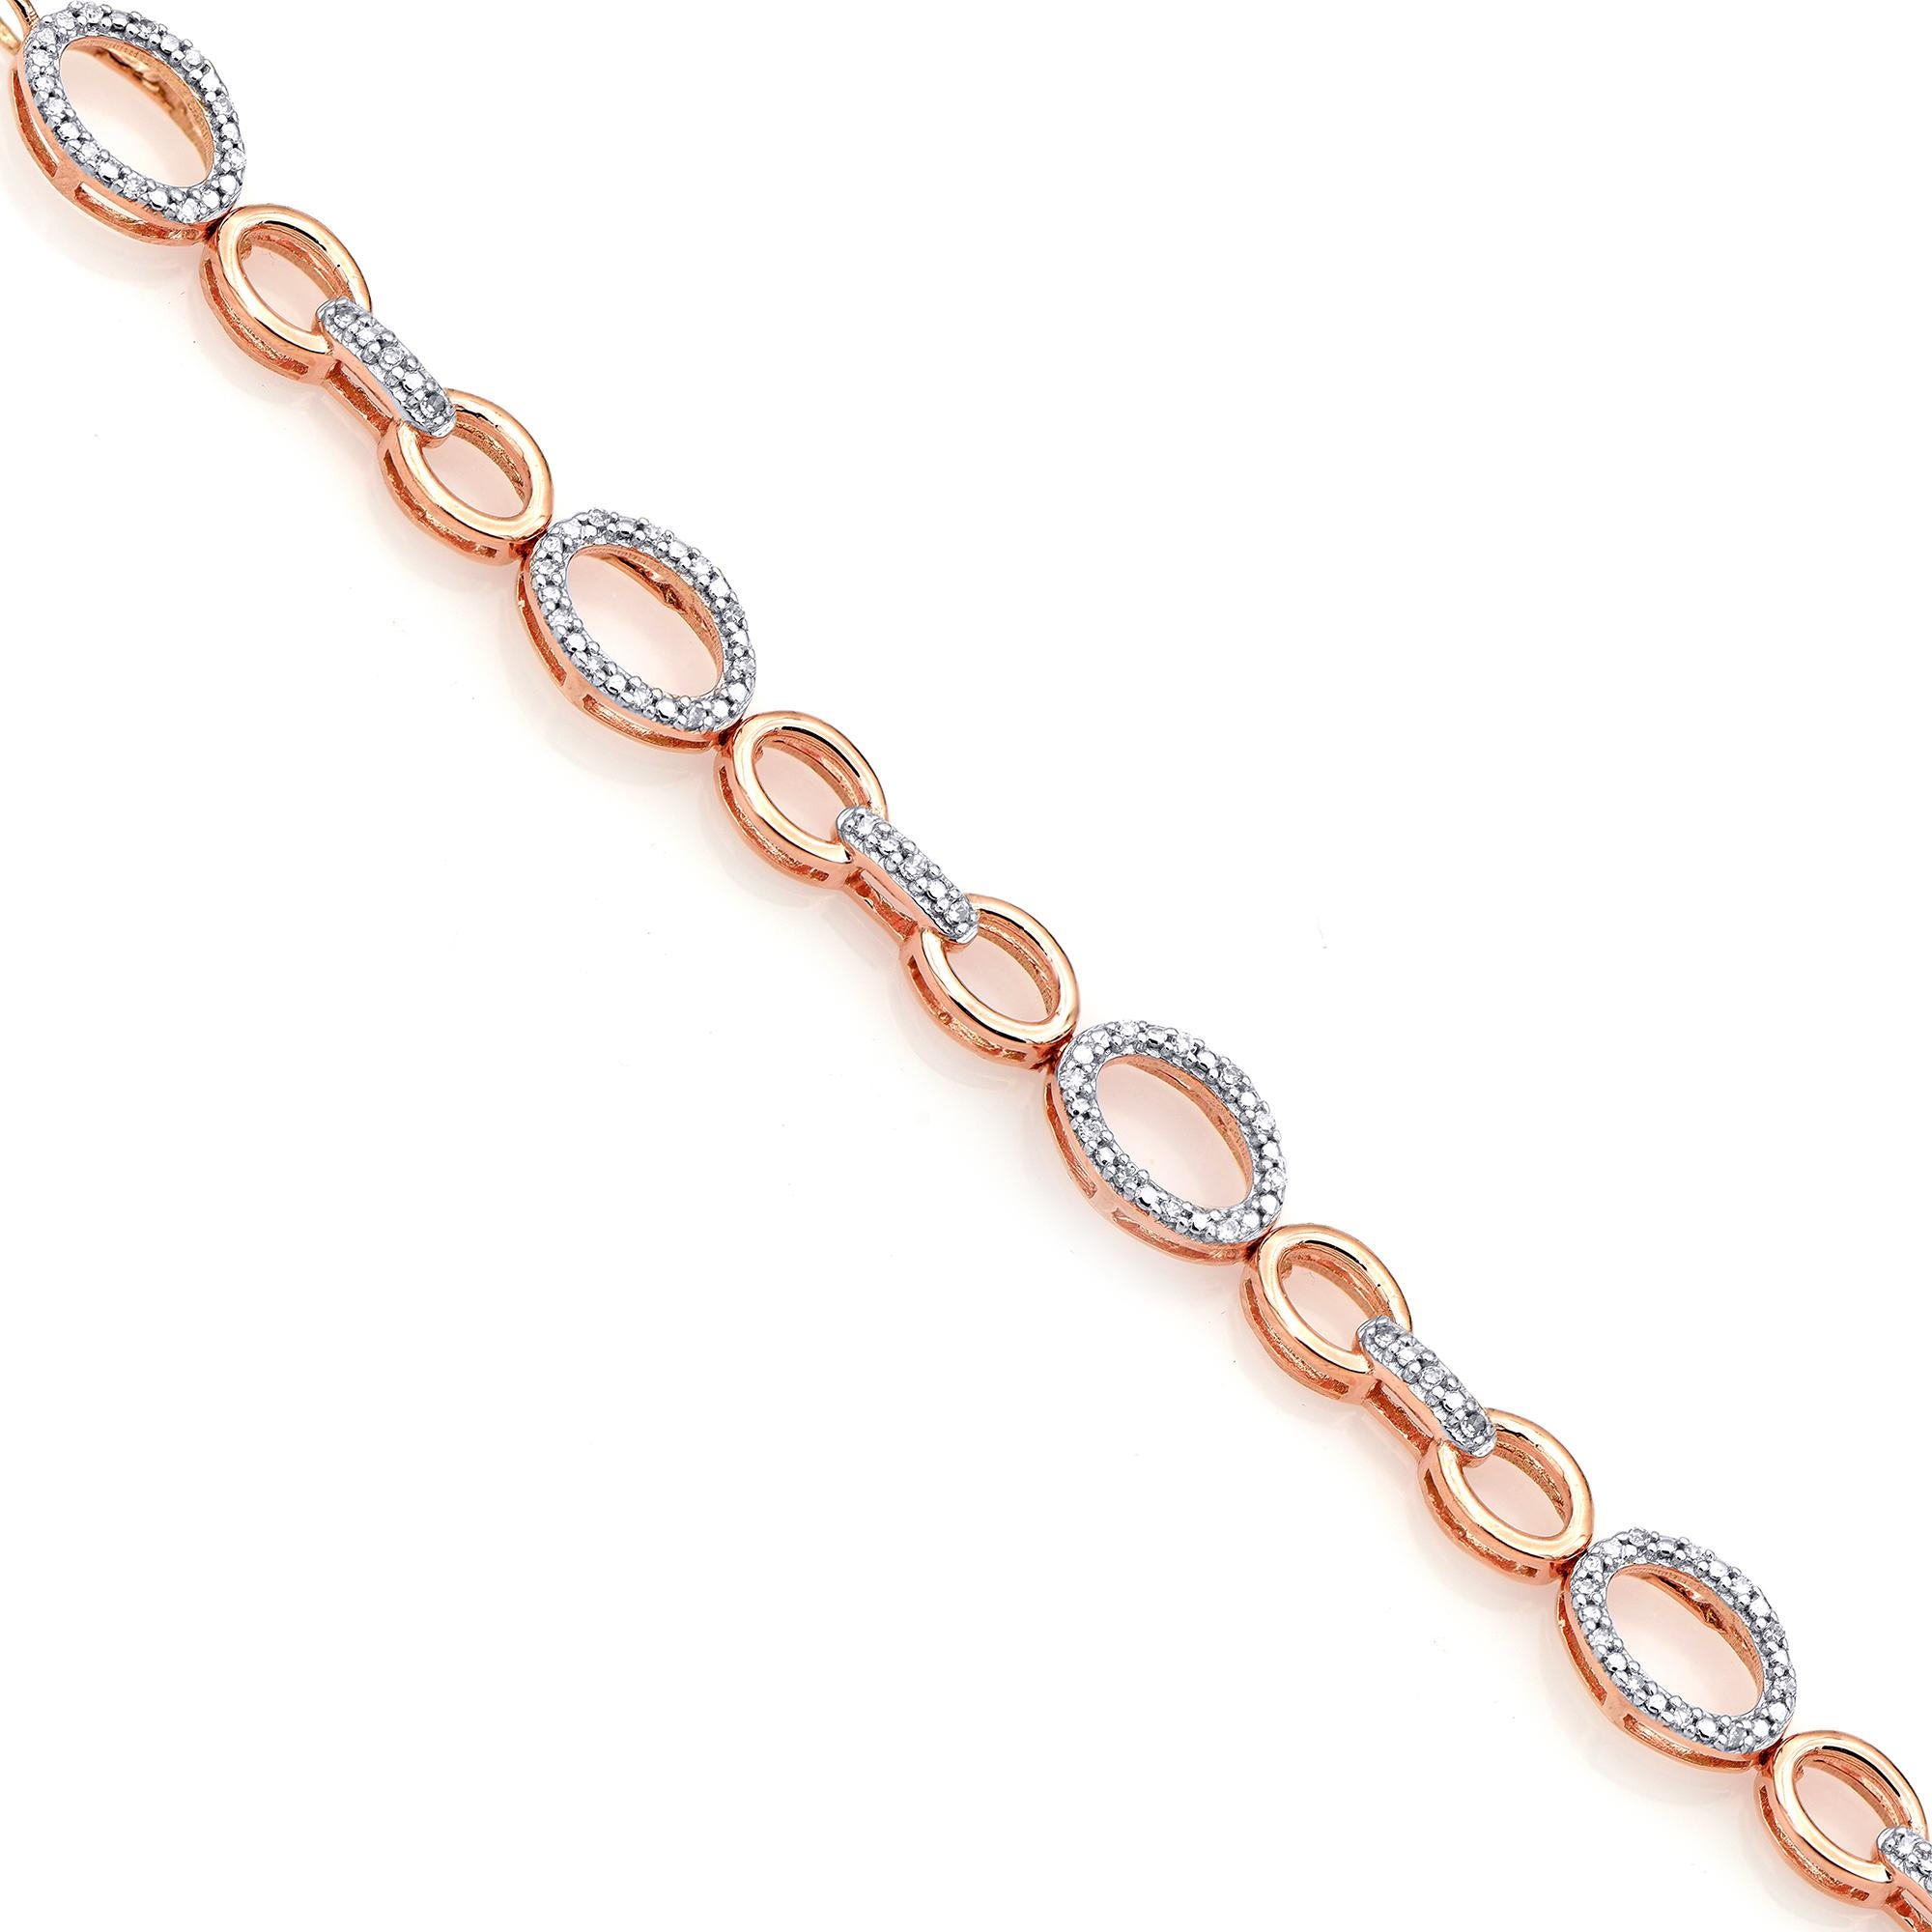 Elegantly designed diamond studded bracelet suitable for everyday wear studded with 104 single cut round diamonds in prong Setting. The diamonds are graded H-I Color, I2 Clarity. Crafted beautifully in 14 Karat Rose Gold and secures comfortably with